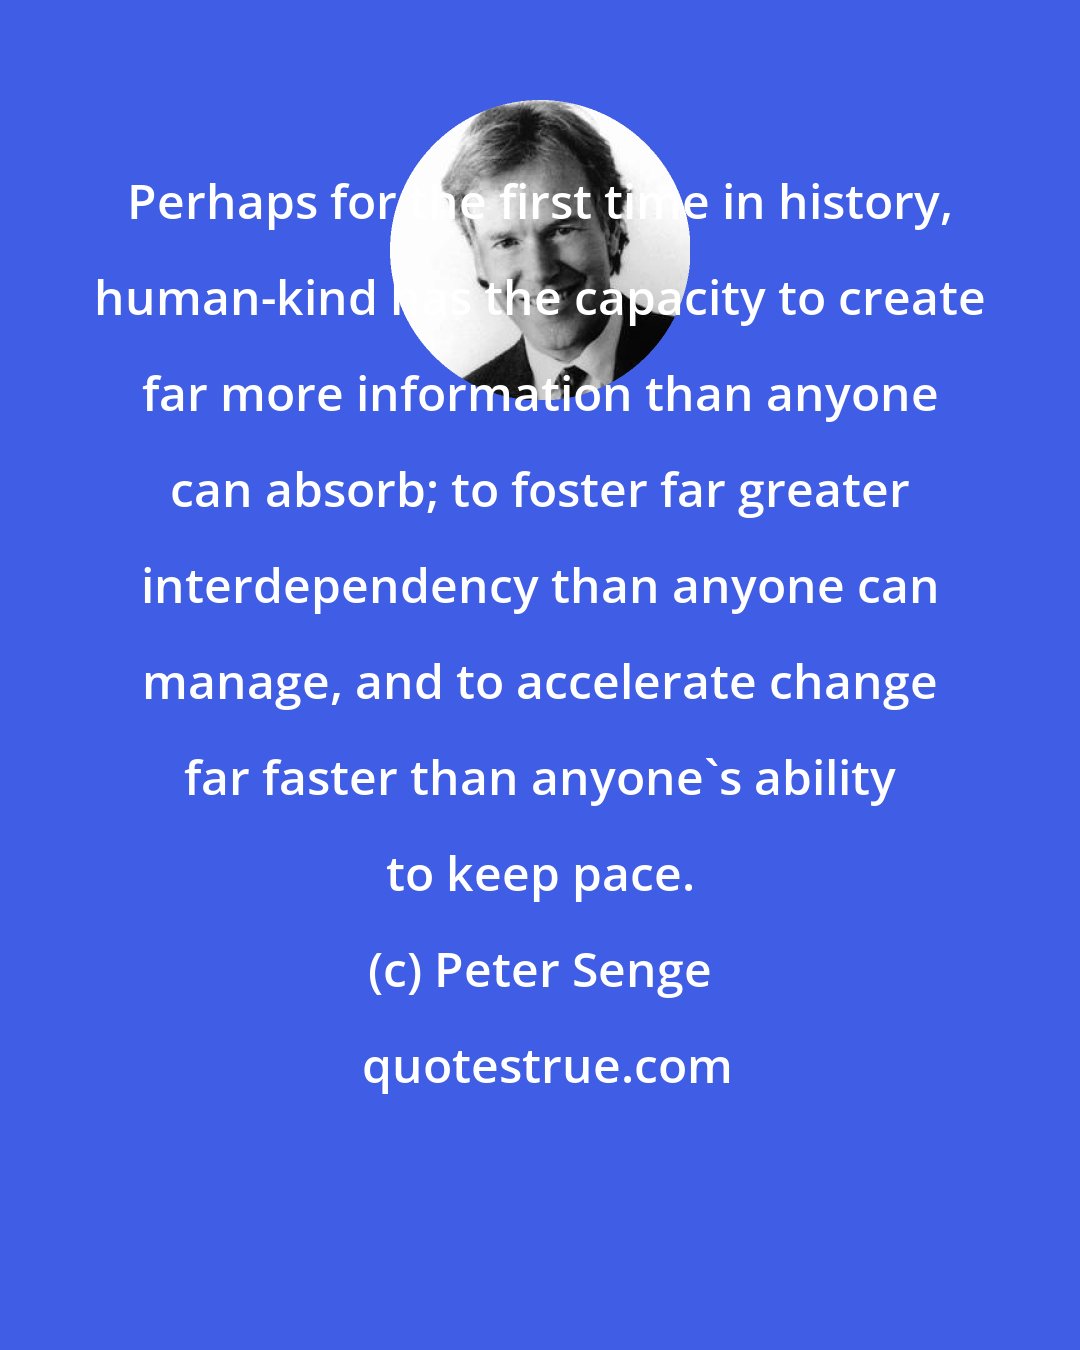 Peter Senge: Perhaps for the first time in history, human-kind has the capacity to create far more information than anyone can absorb; to foster far greater interdependency than anyone can manage, and to accelerate change far faster than anyone's ability to keep pace.